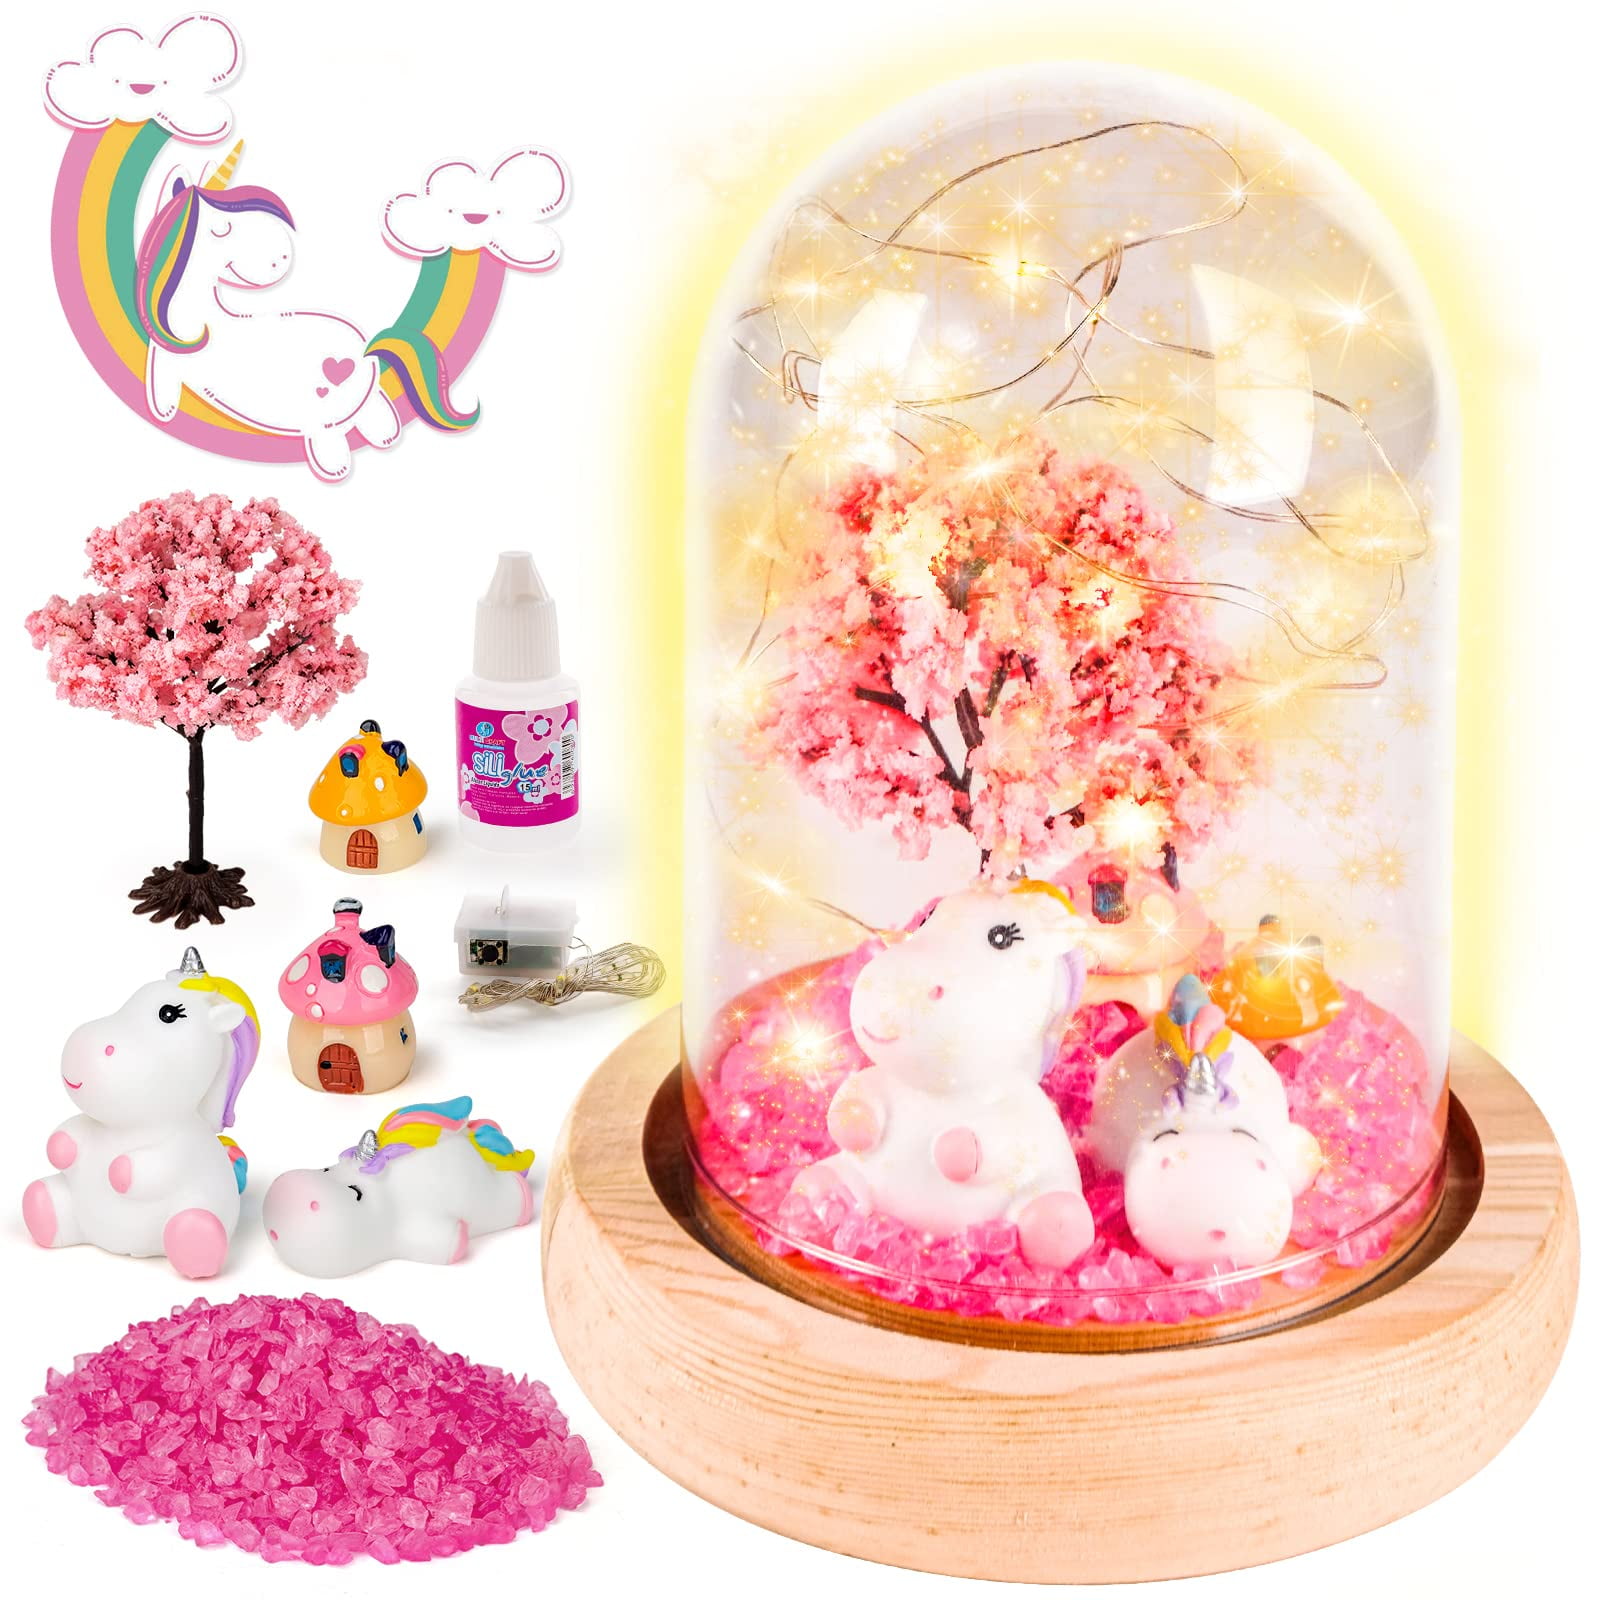 MINGKIDS Unicorns Gifts for 4-9 Year Old Girls,Build Your Own Night Light  Unicorn Craft Kit for Kids Age 4-8,5 to 10 Year Old Girl Birthday